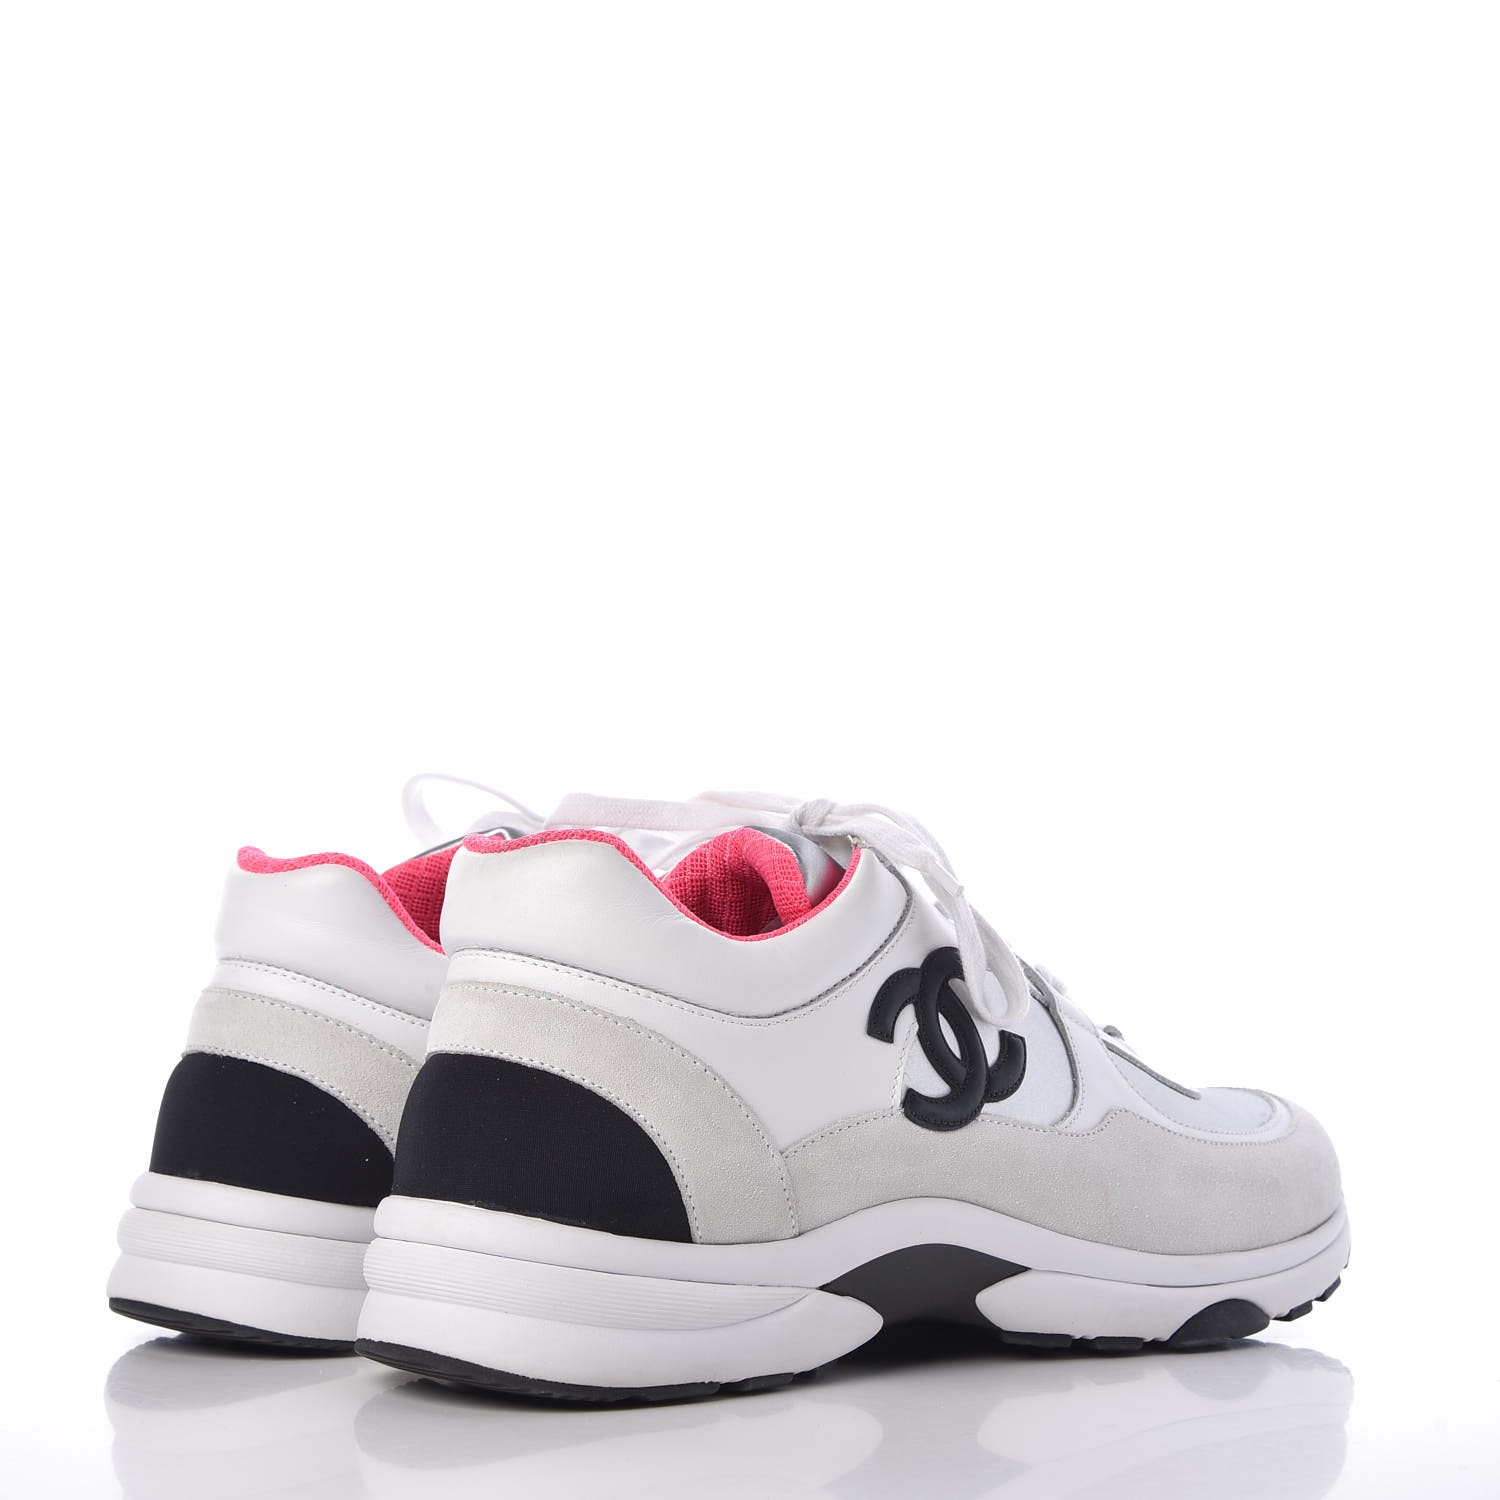 CHANEL Suede Calfskin CC Sneakers 41 White Silver Fluo Pink 319796